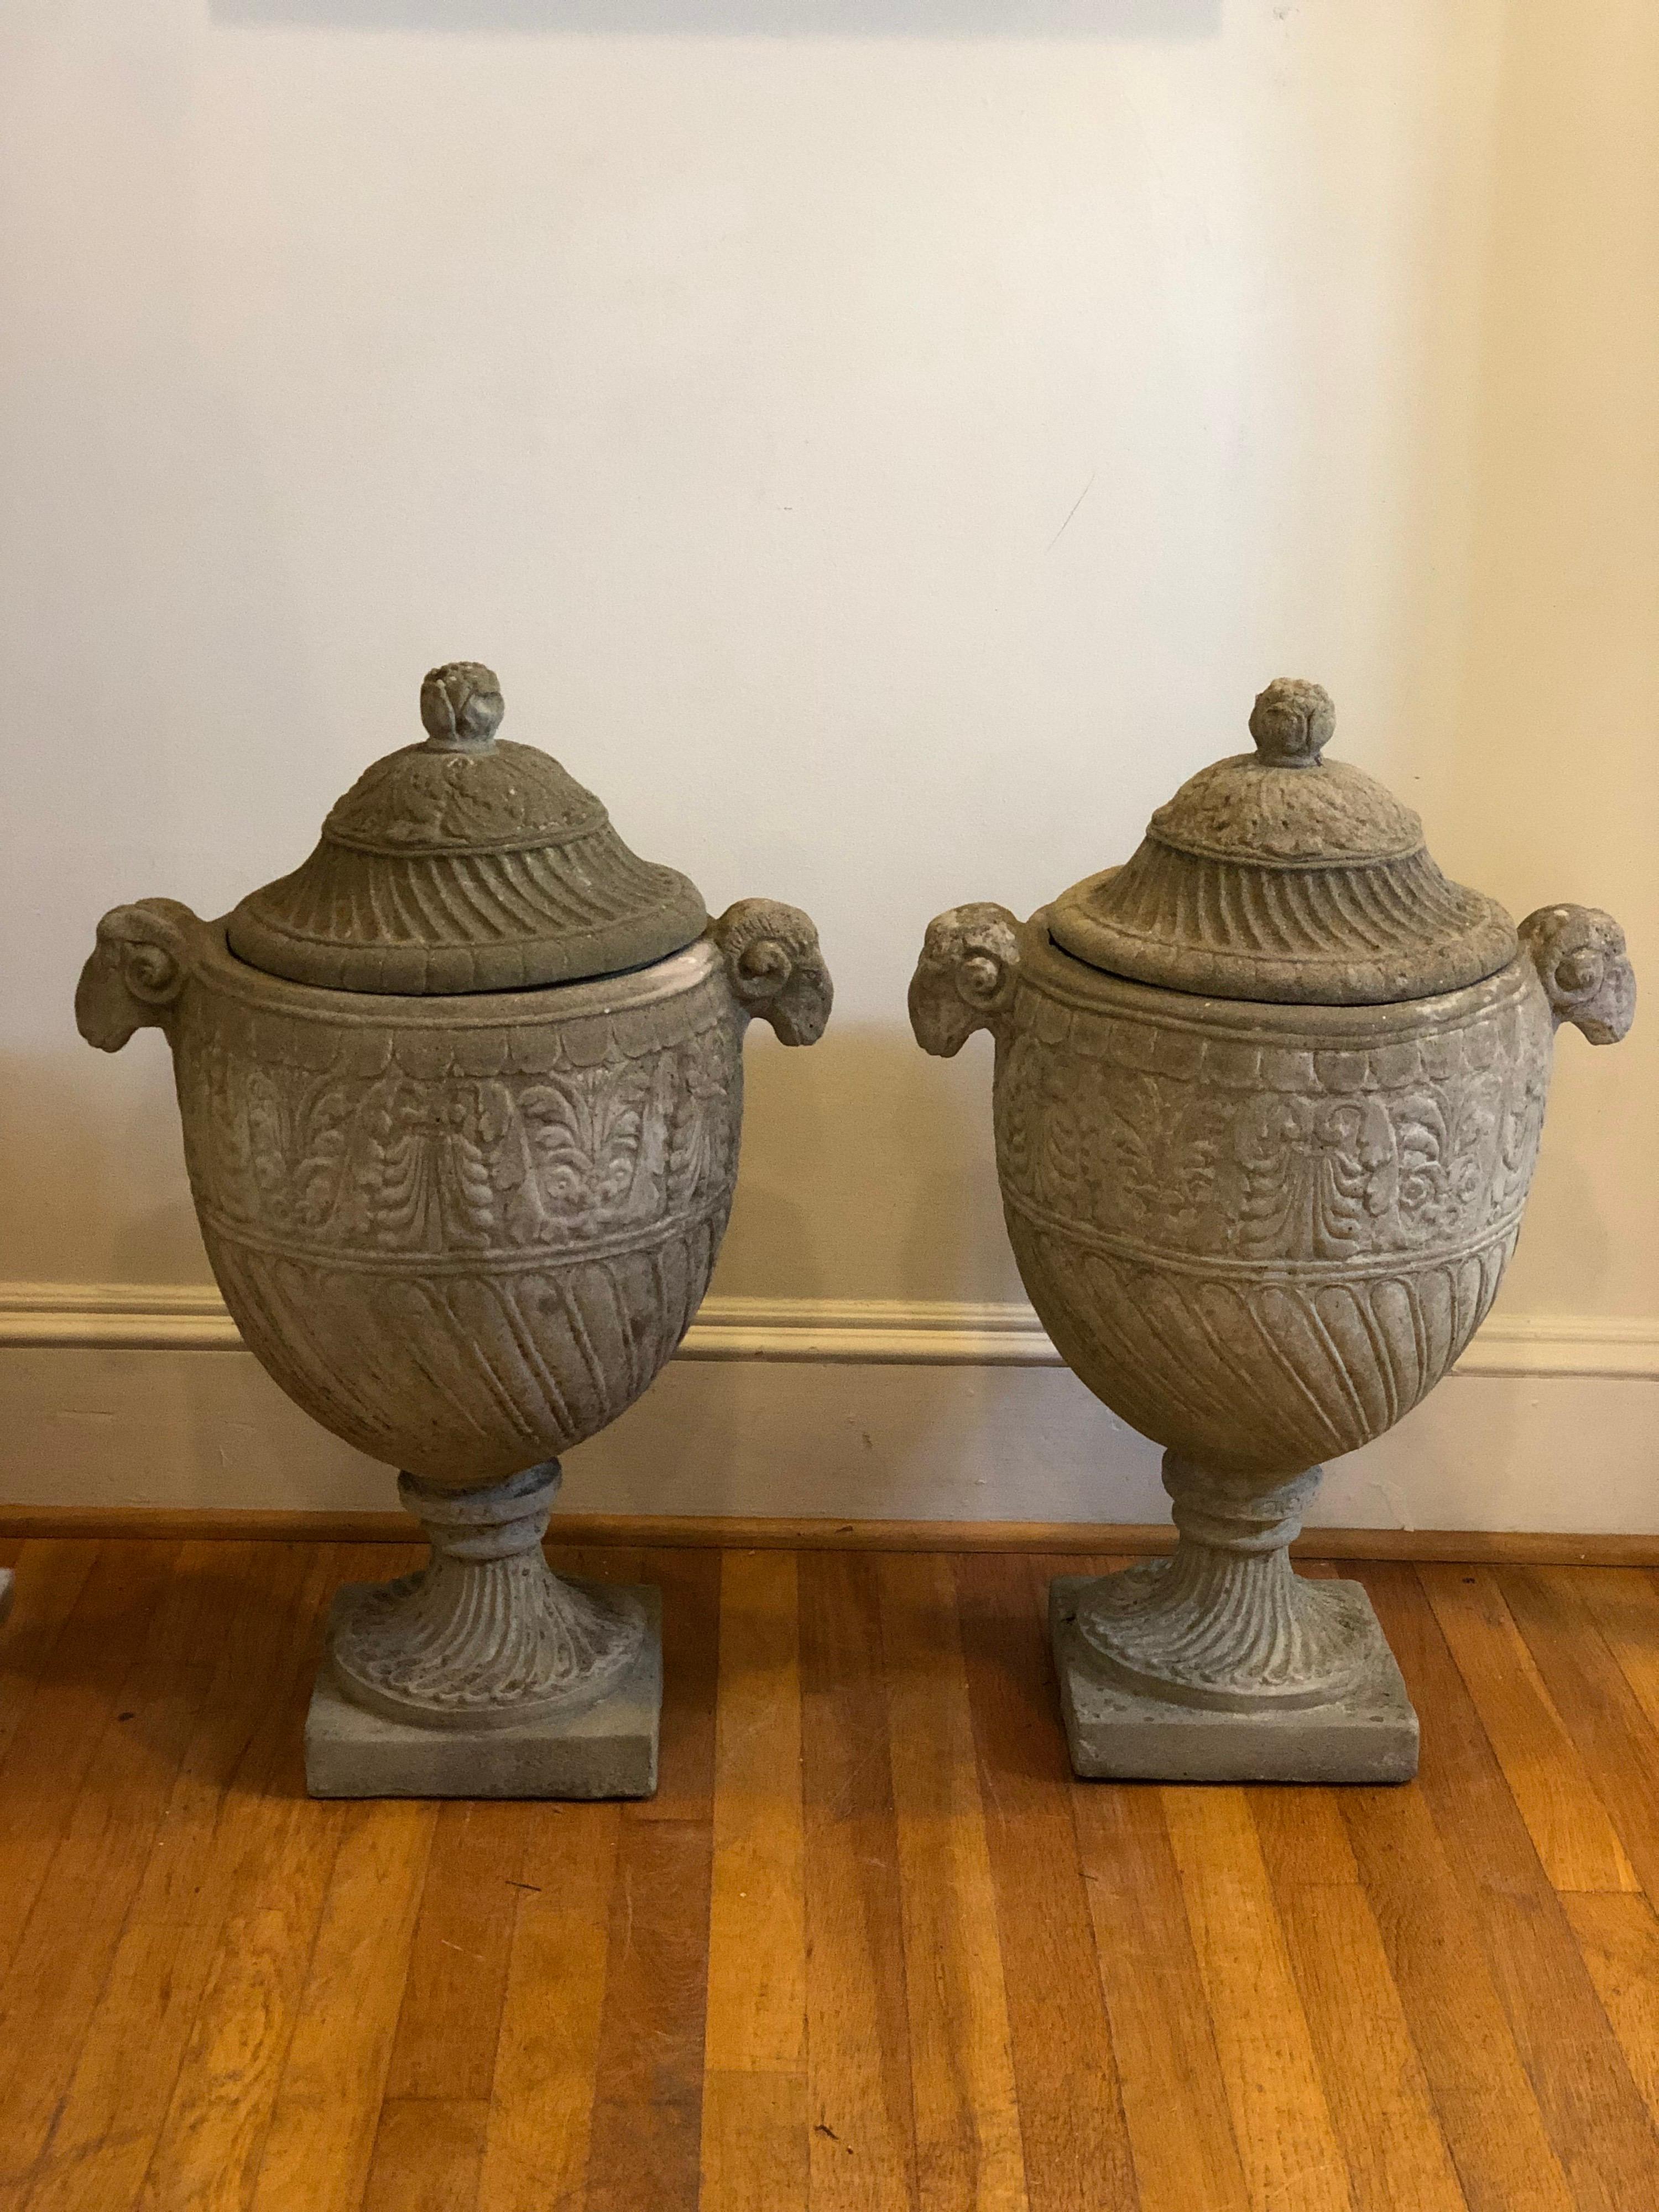 Pair of Neoclassical garden or mantel Ram Urns in natural stone with lids.
Natural patina over the years giving beautiful character. 

Please see pics for condition.